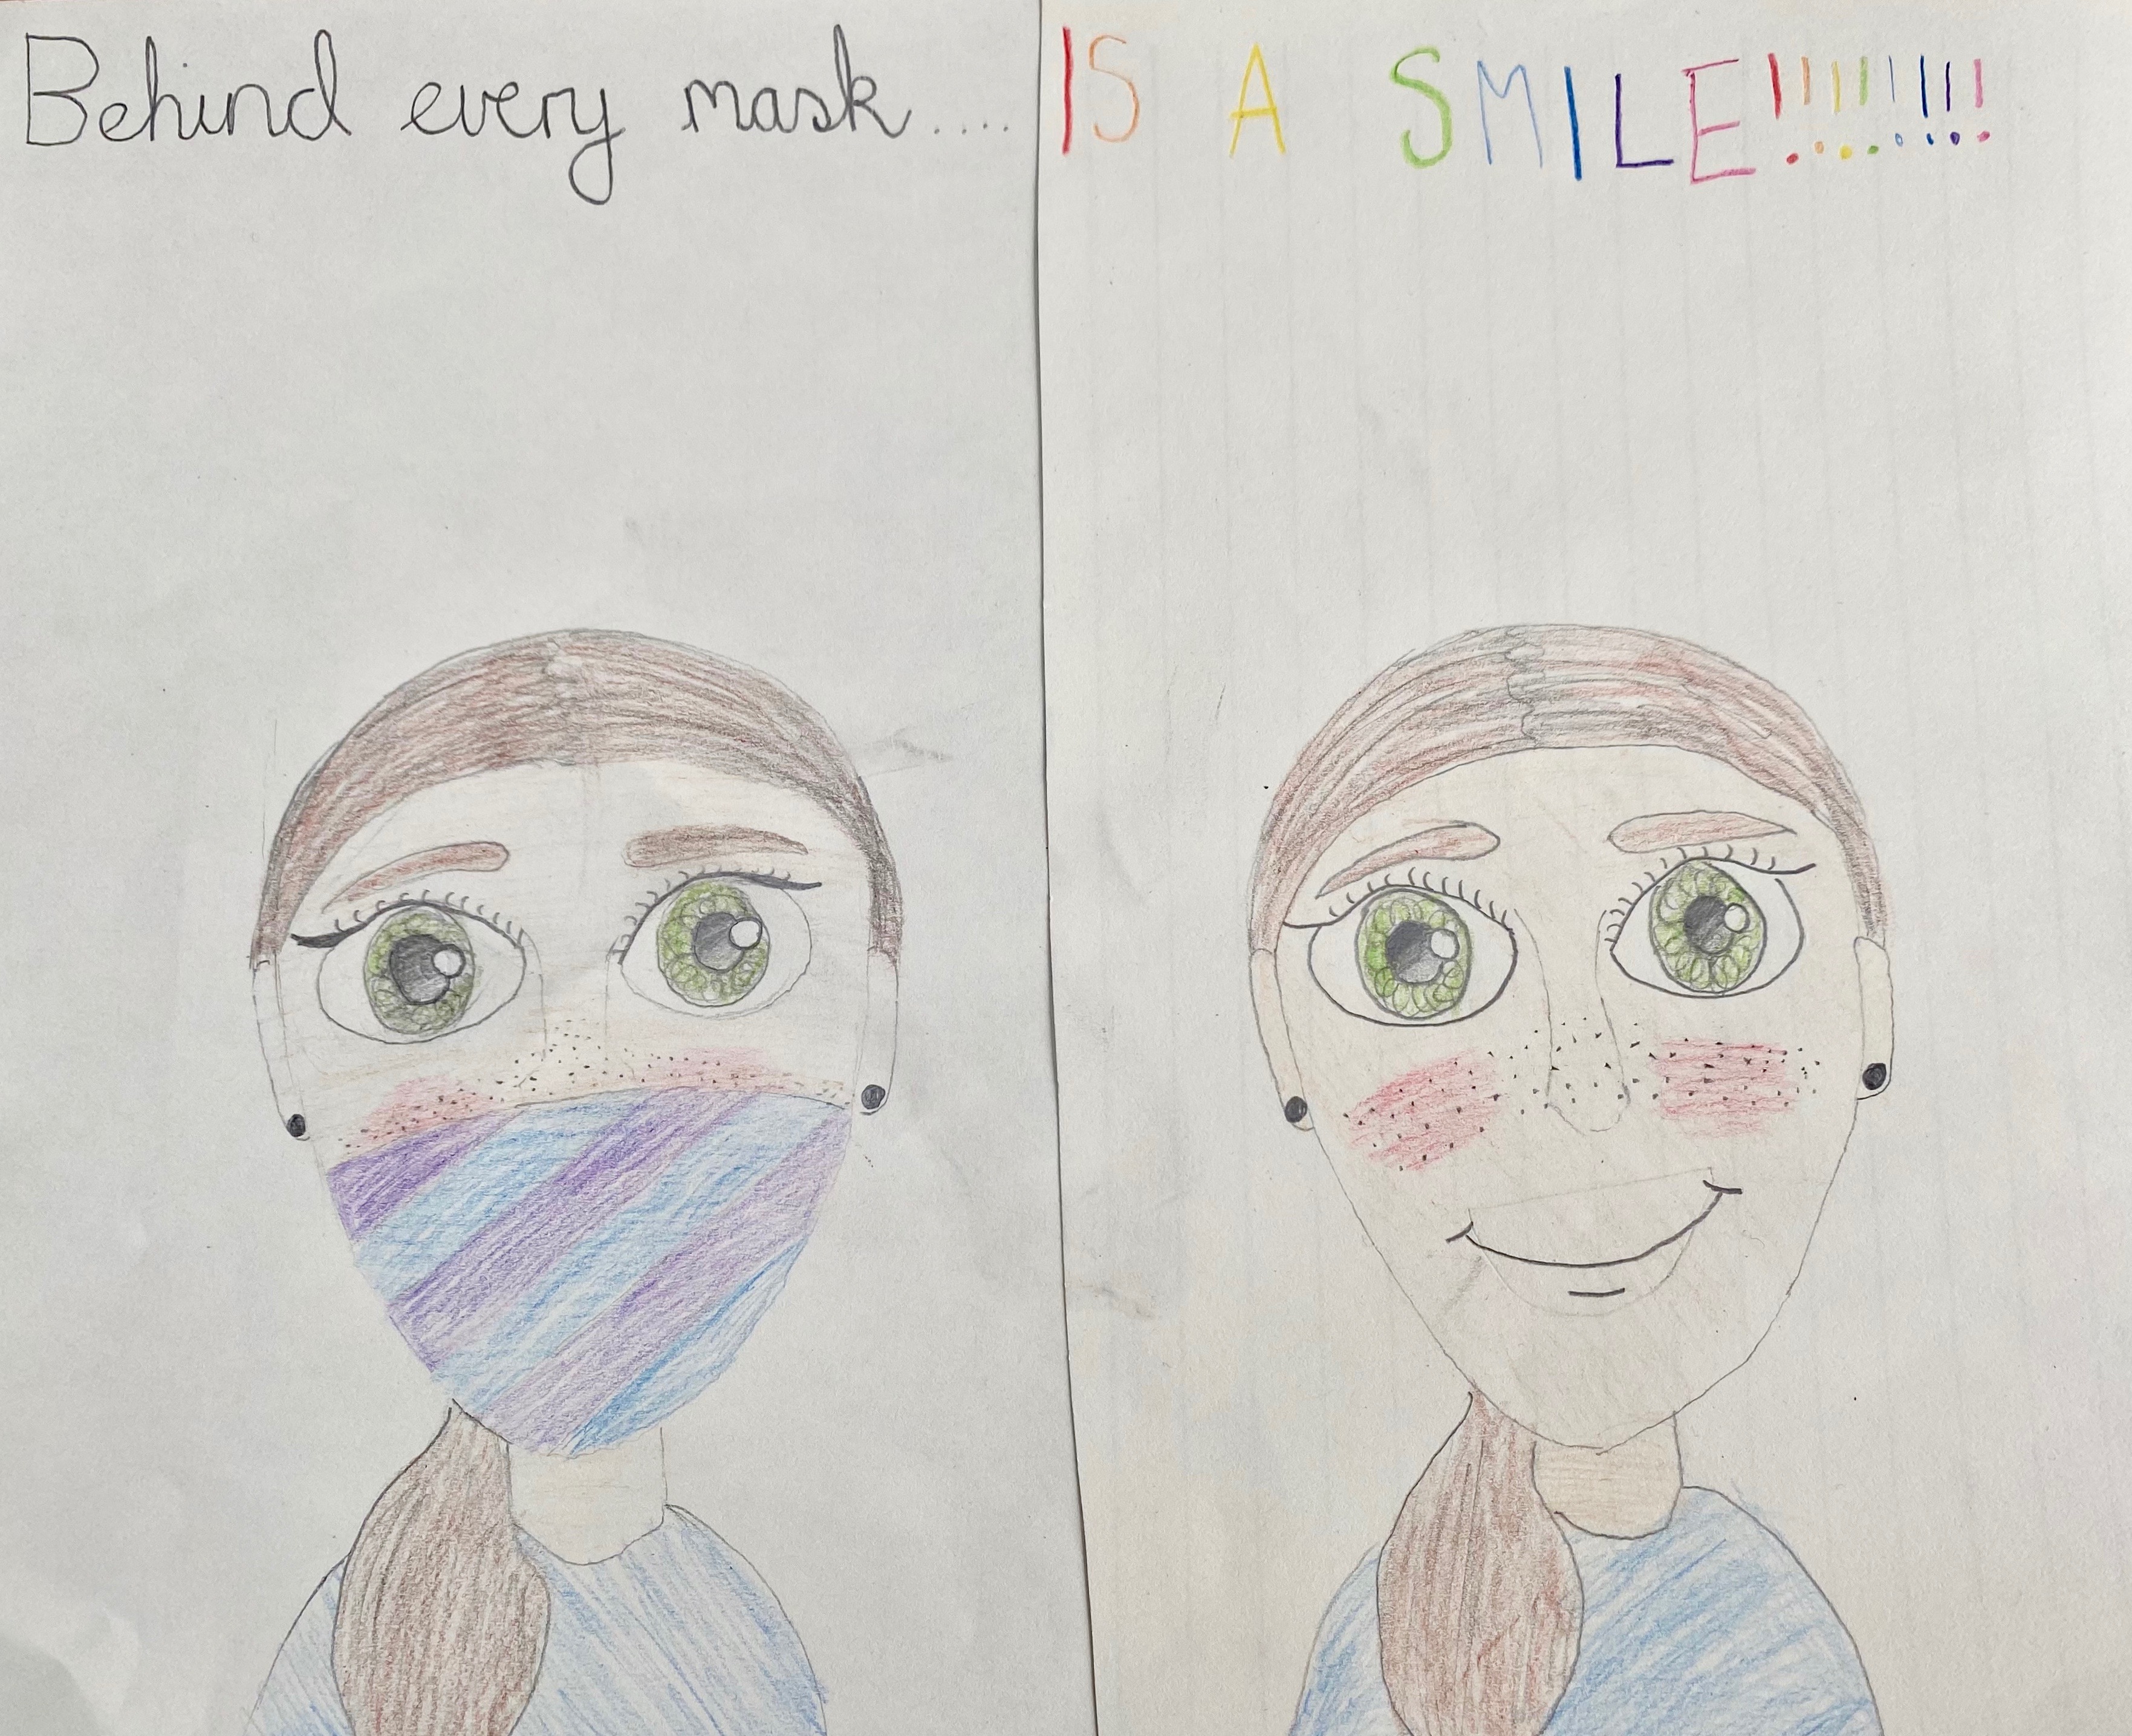 'Behind every mask is a smile' by Lauren (10) from Kildare